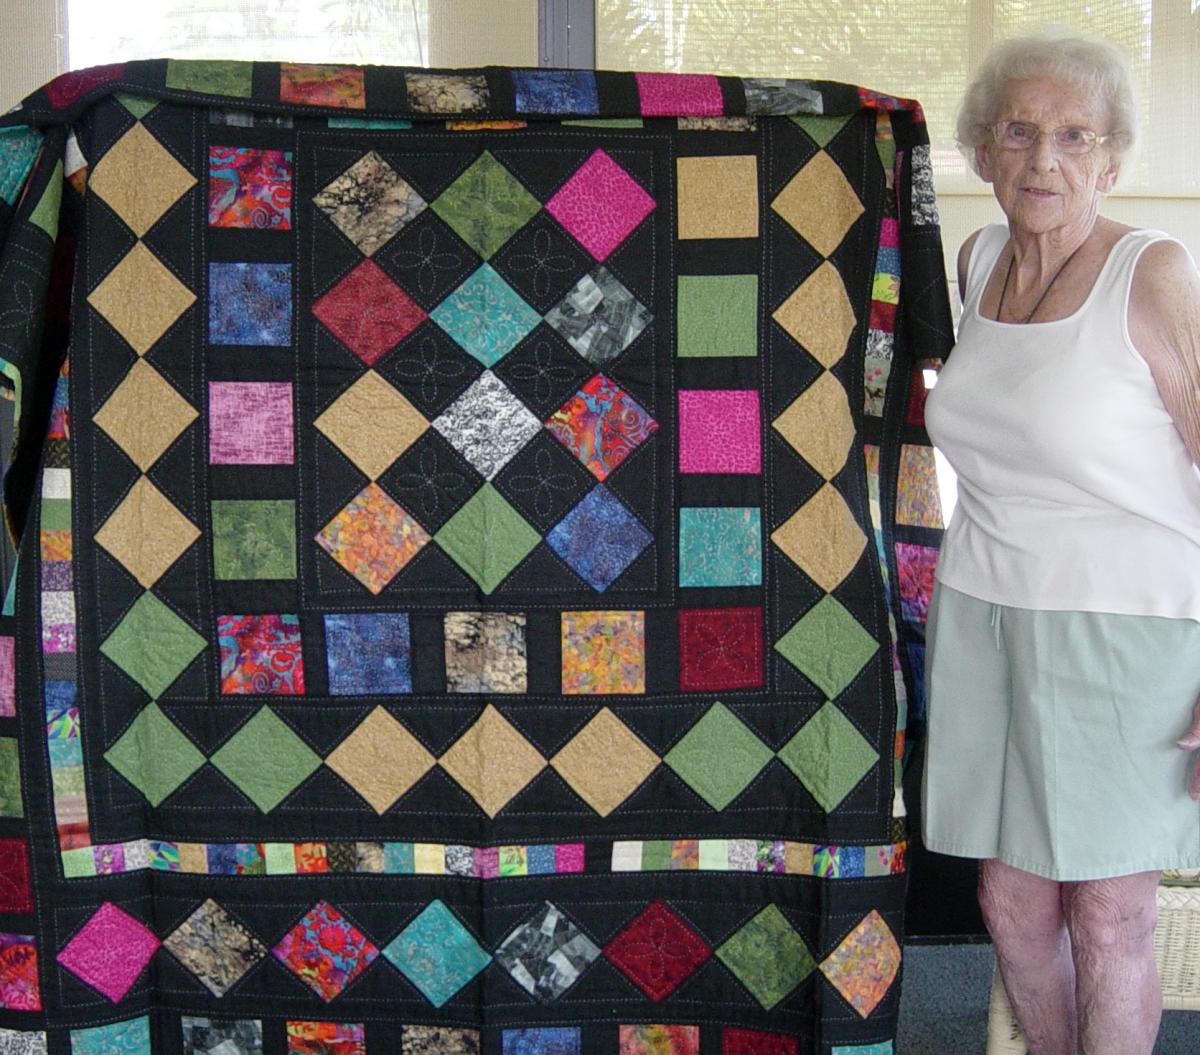 The grandmother of Cat's Meow staffer, Brent, showing off the Magic Carpet quilt she made for Brent and his wife.